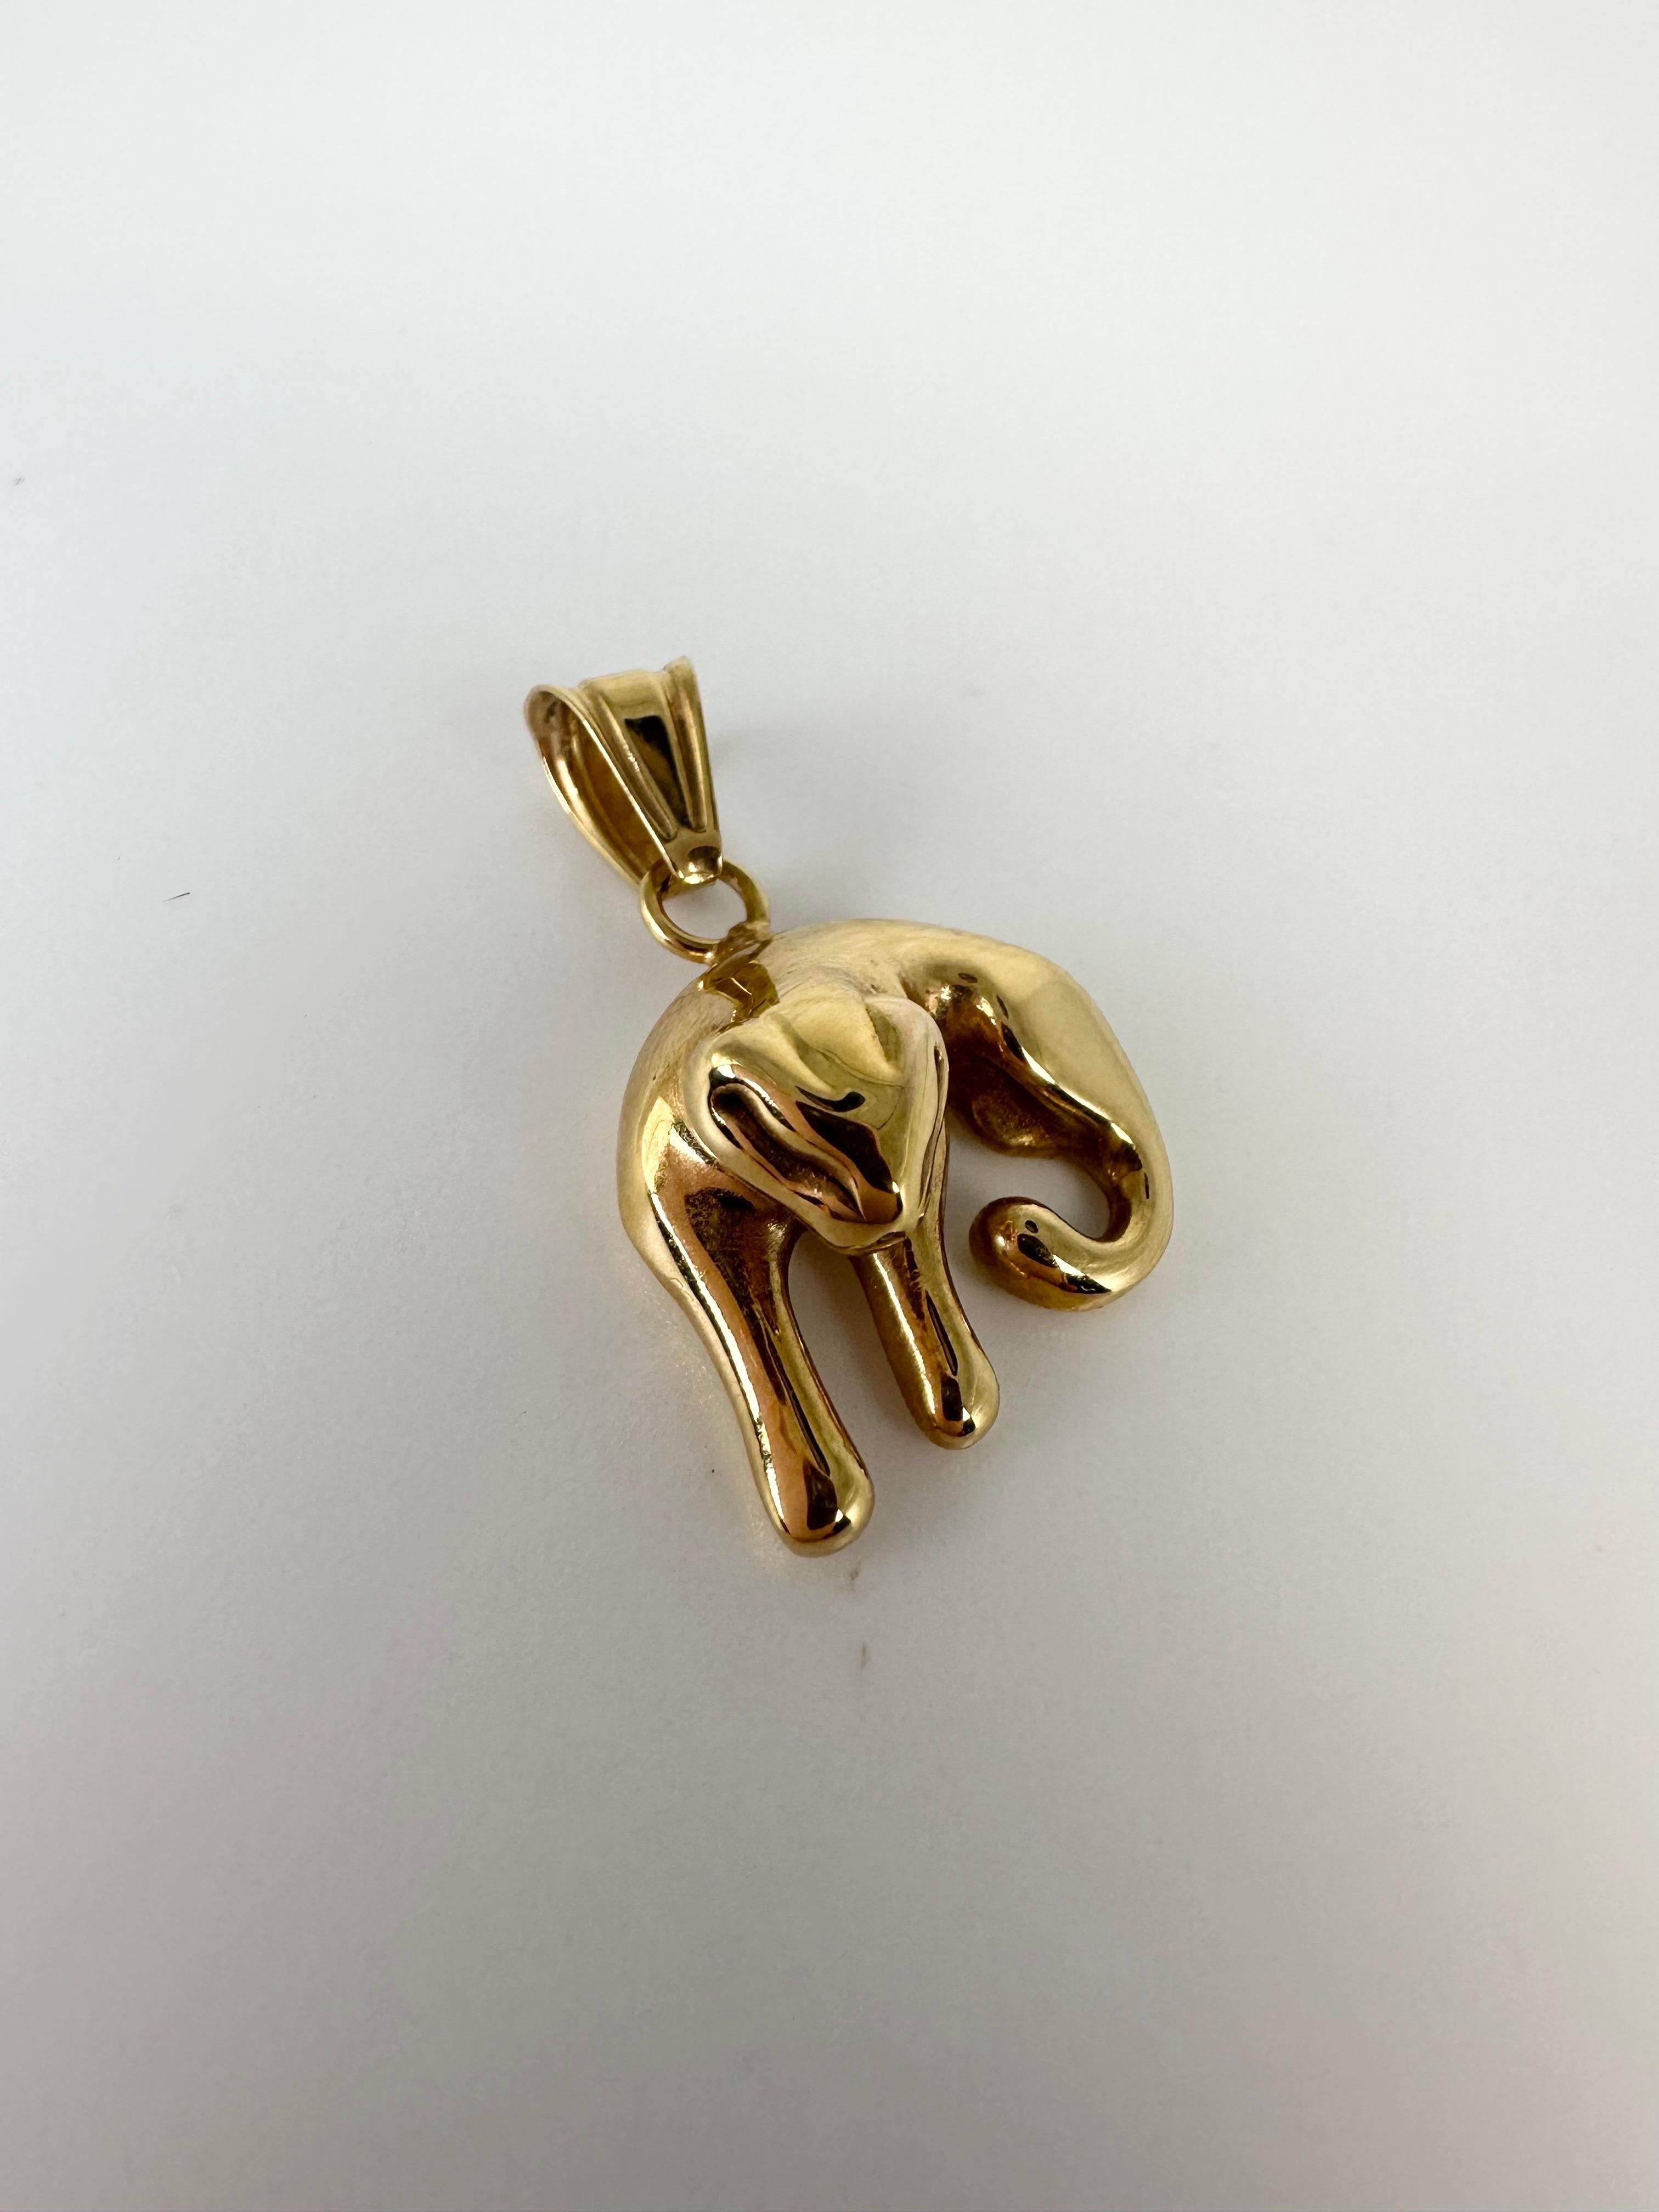 Stunning panther electroform and halo yet so substantial and beautiful in 14kt gold!

GOLD: 14KT gold
Grams:1.81
Backing: omega
Item:43500050ro

WHAT YOU GET AT STAMPAR JEWELERS:
Stampar Jewelers, located in the heart of Jupiter, Florida, is a